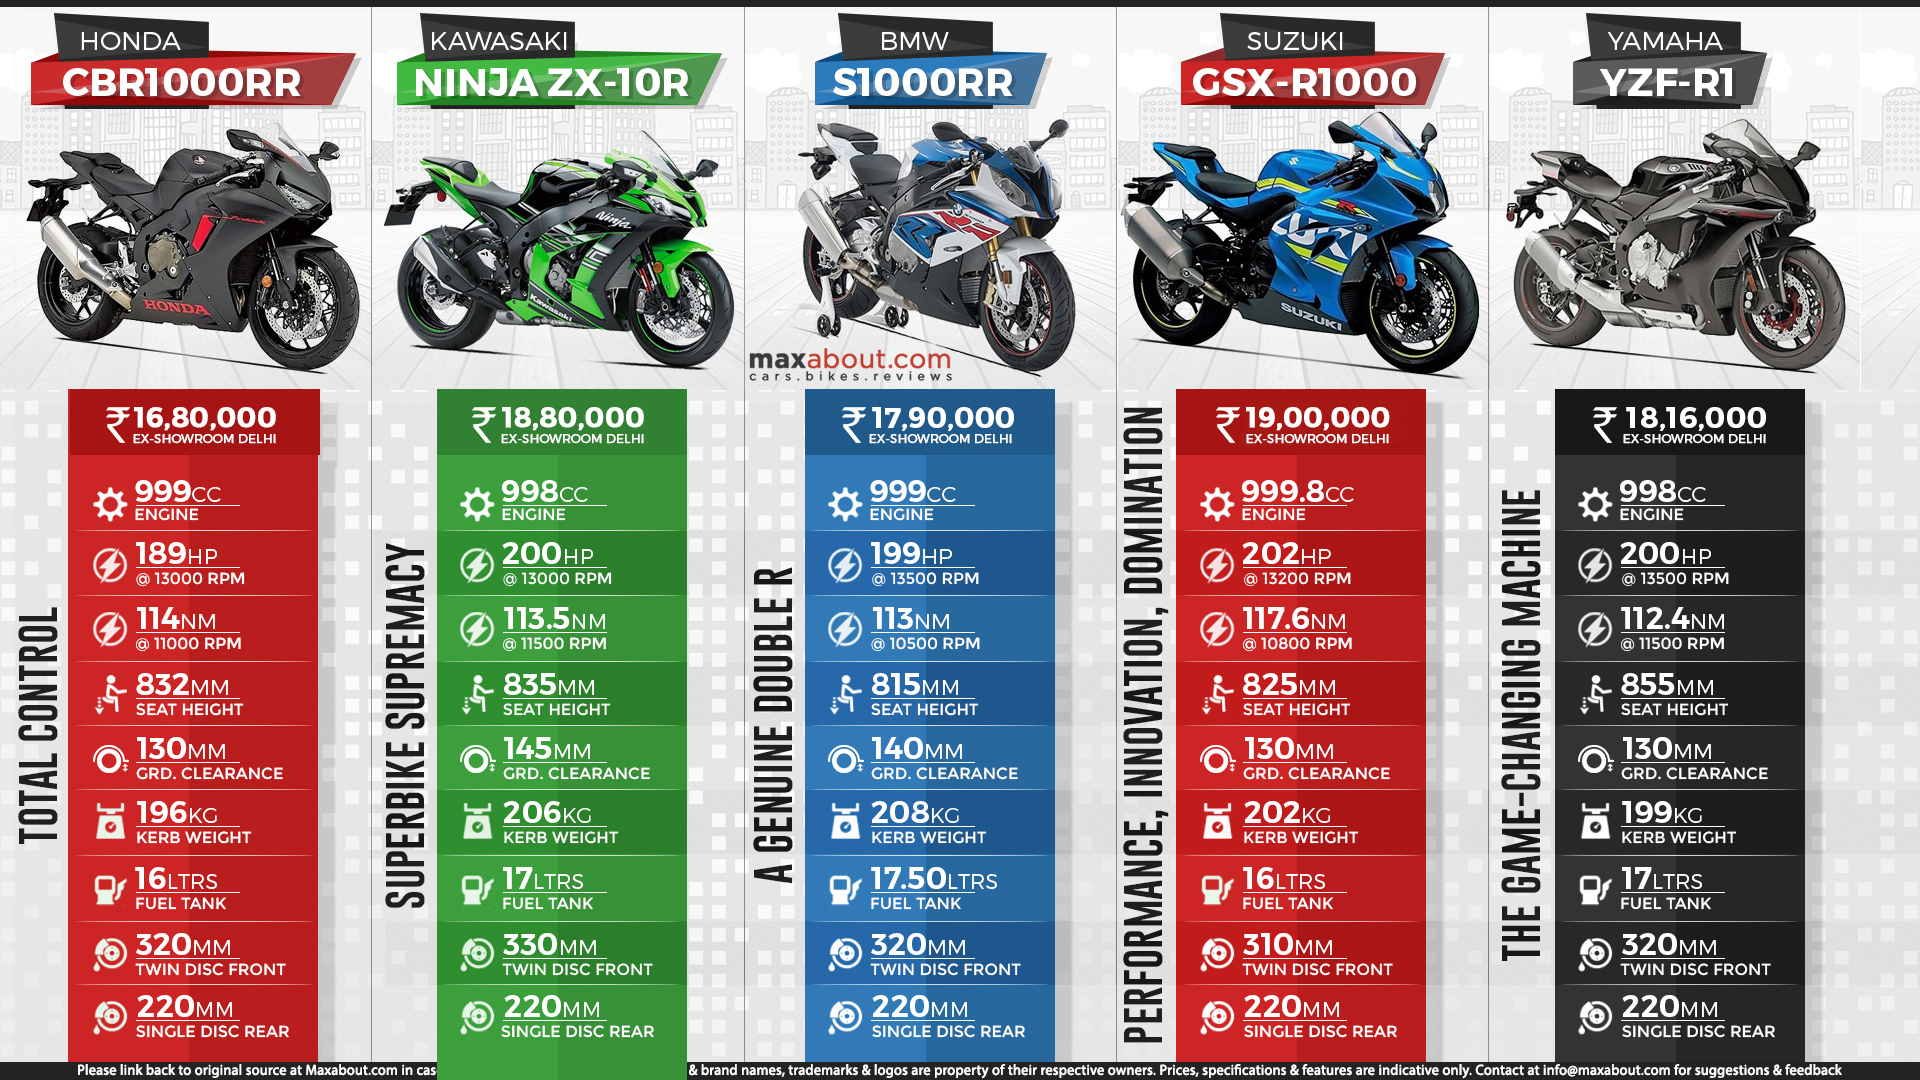 Infographics Image - Cbr 1000rr Price In India 2018 - HD Wallpaper 